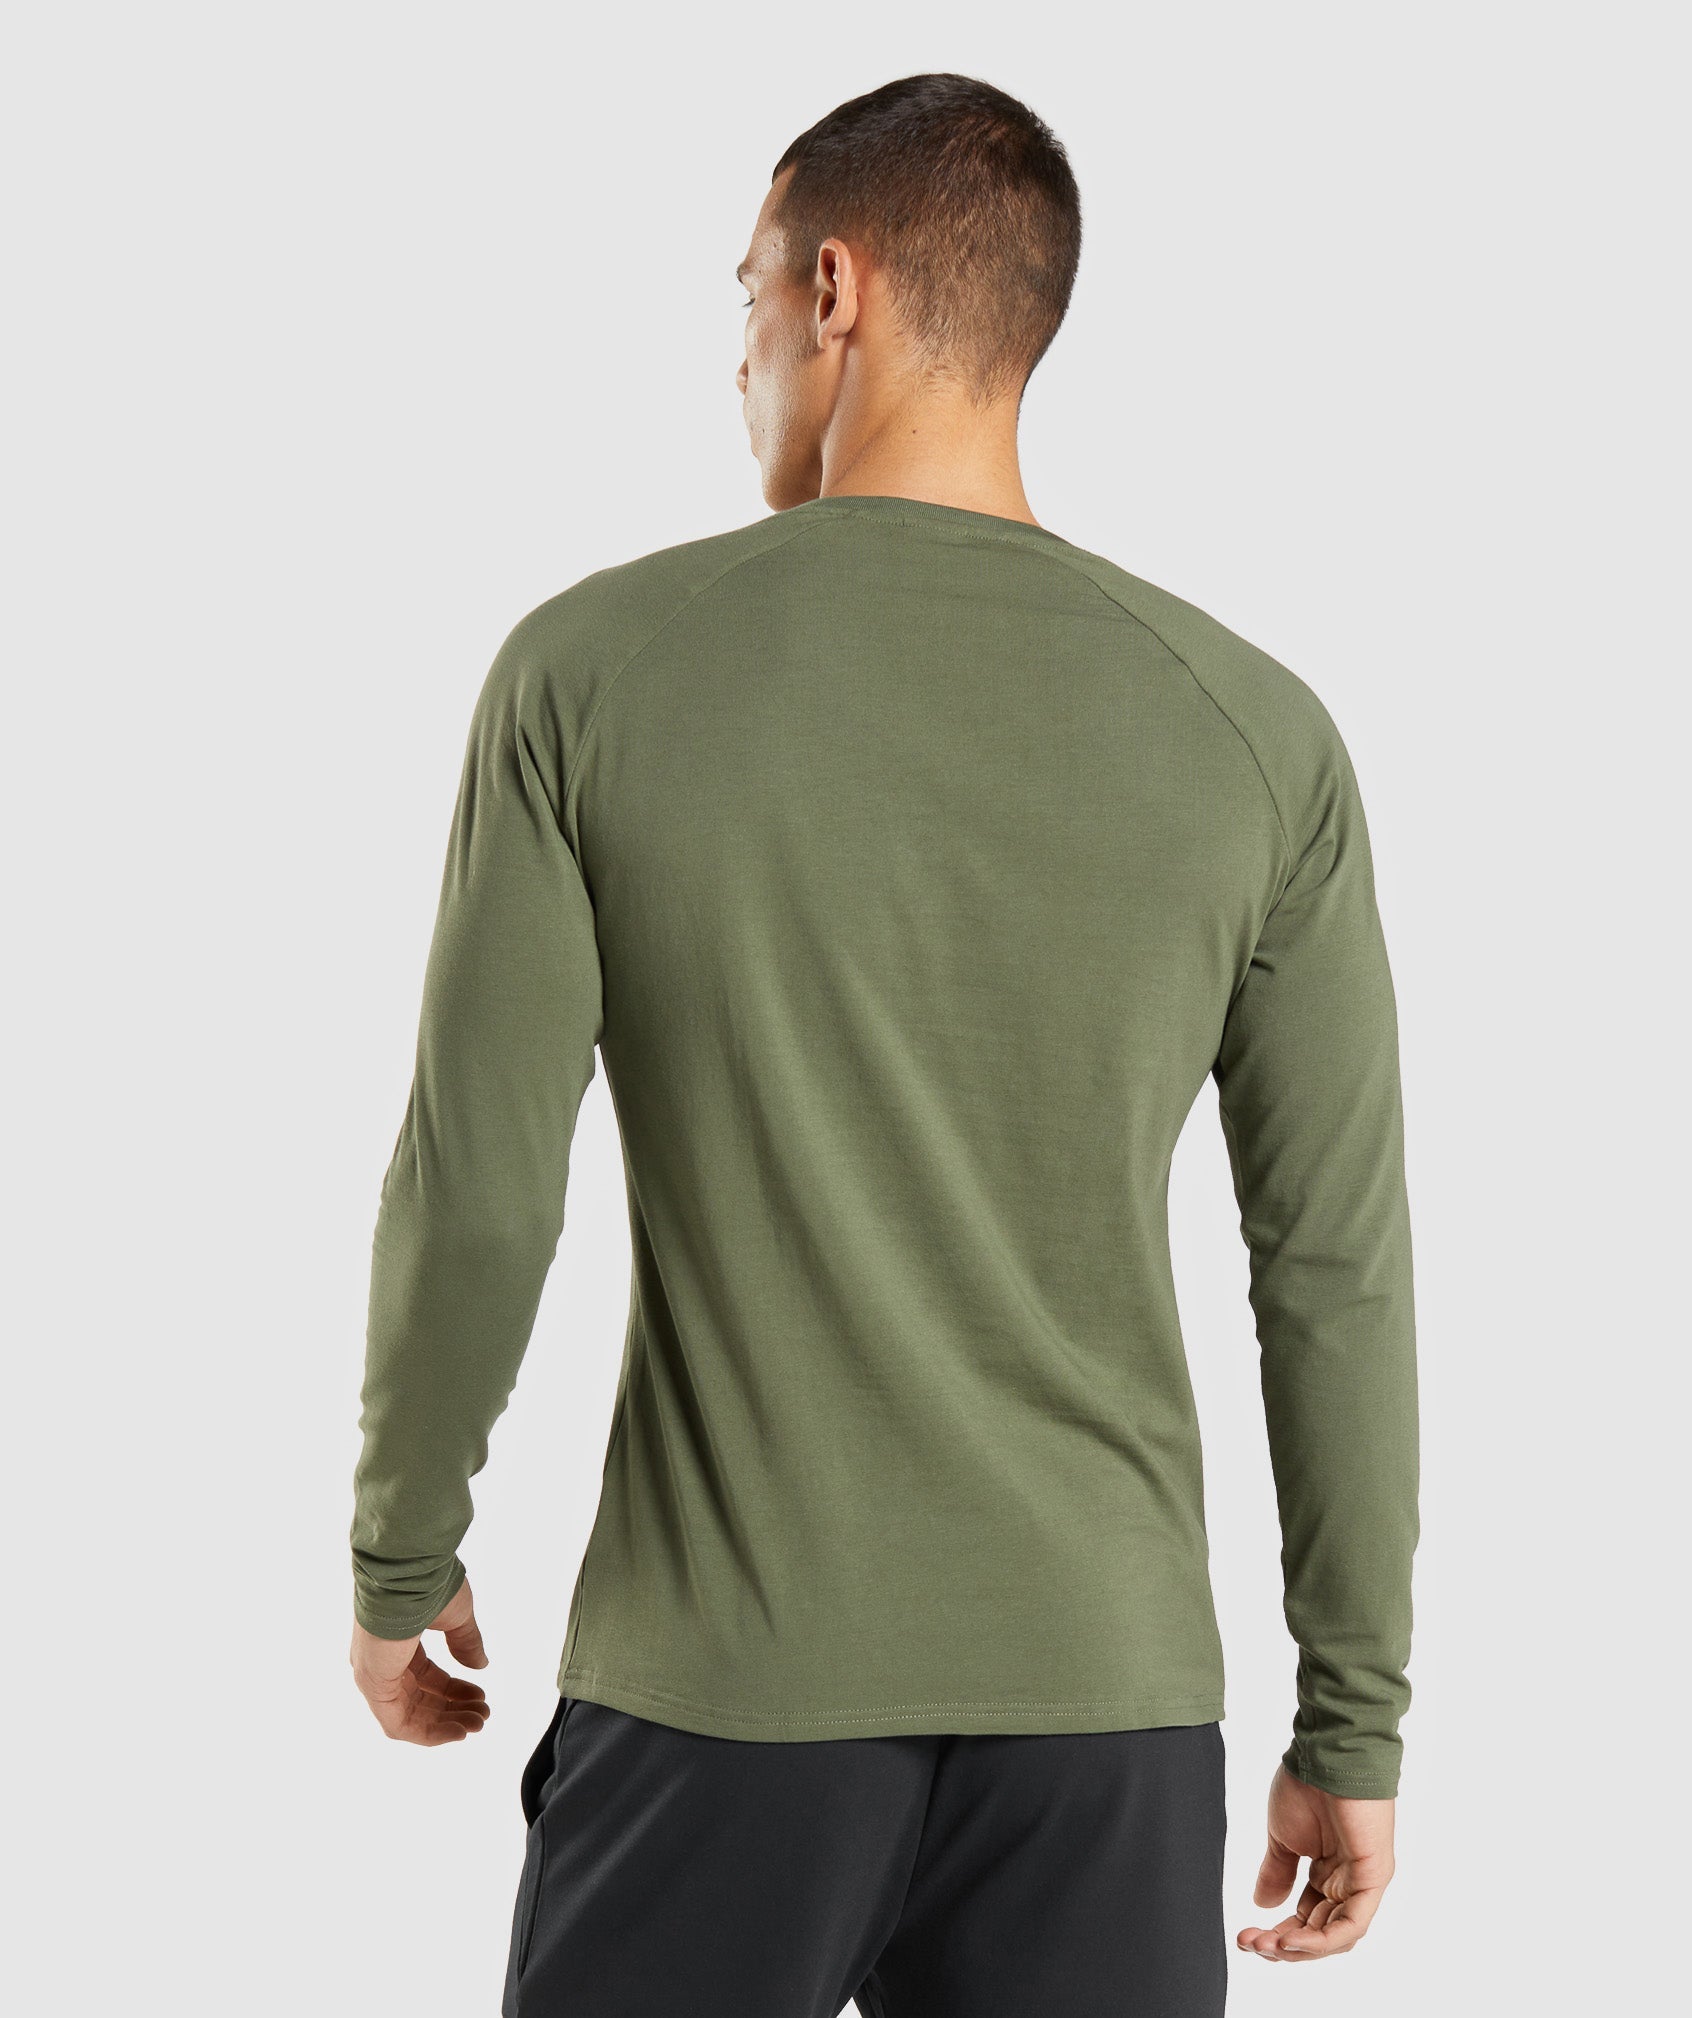 Apollo Long Sleeve T-Shirt in Core Olive - view 3